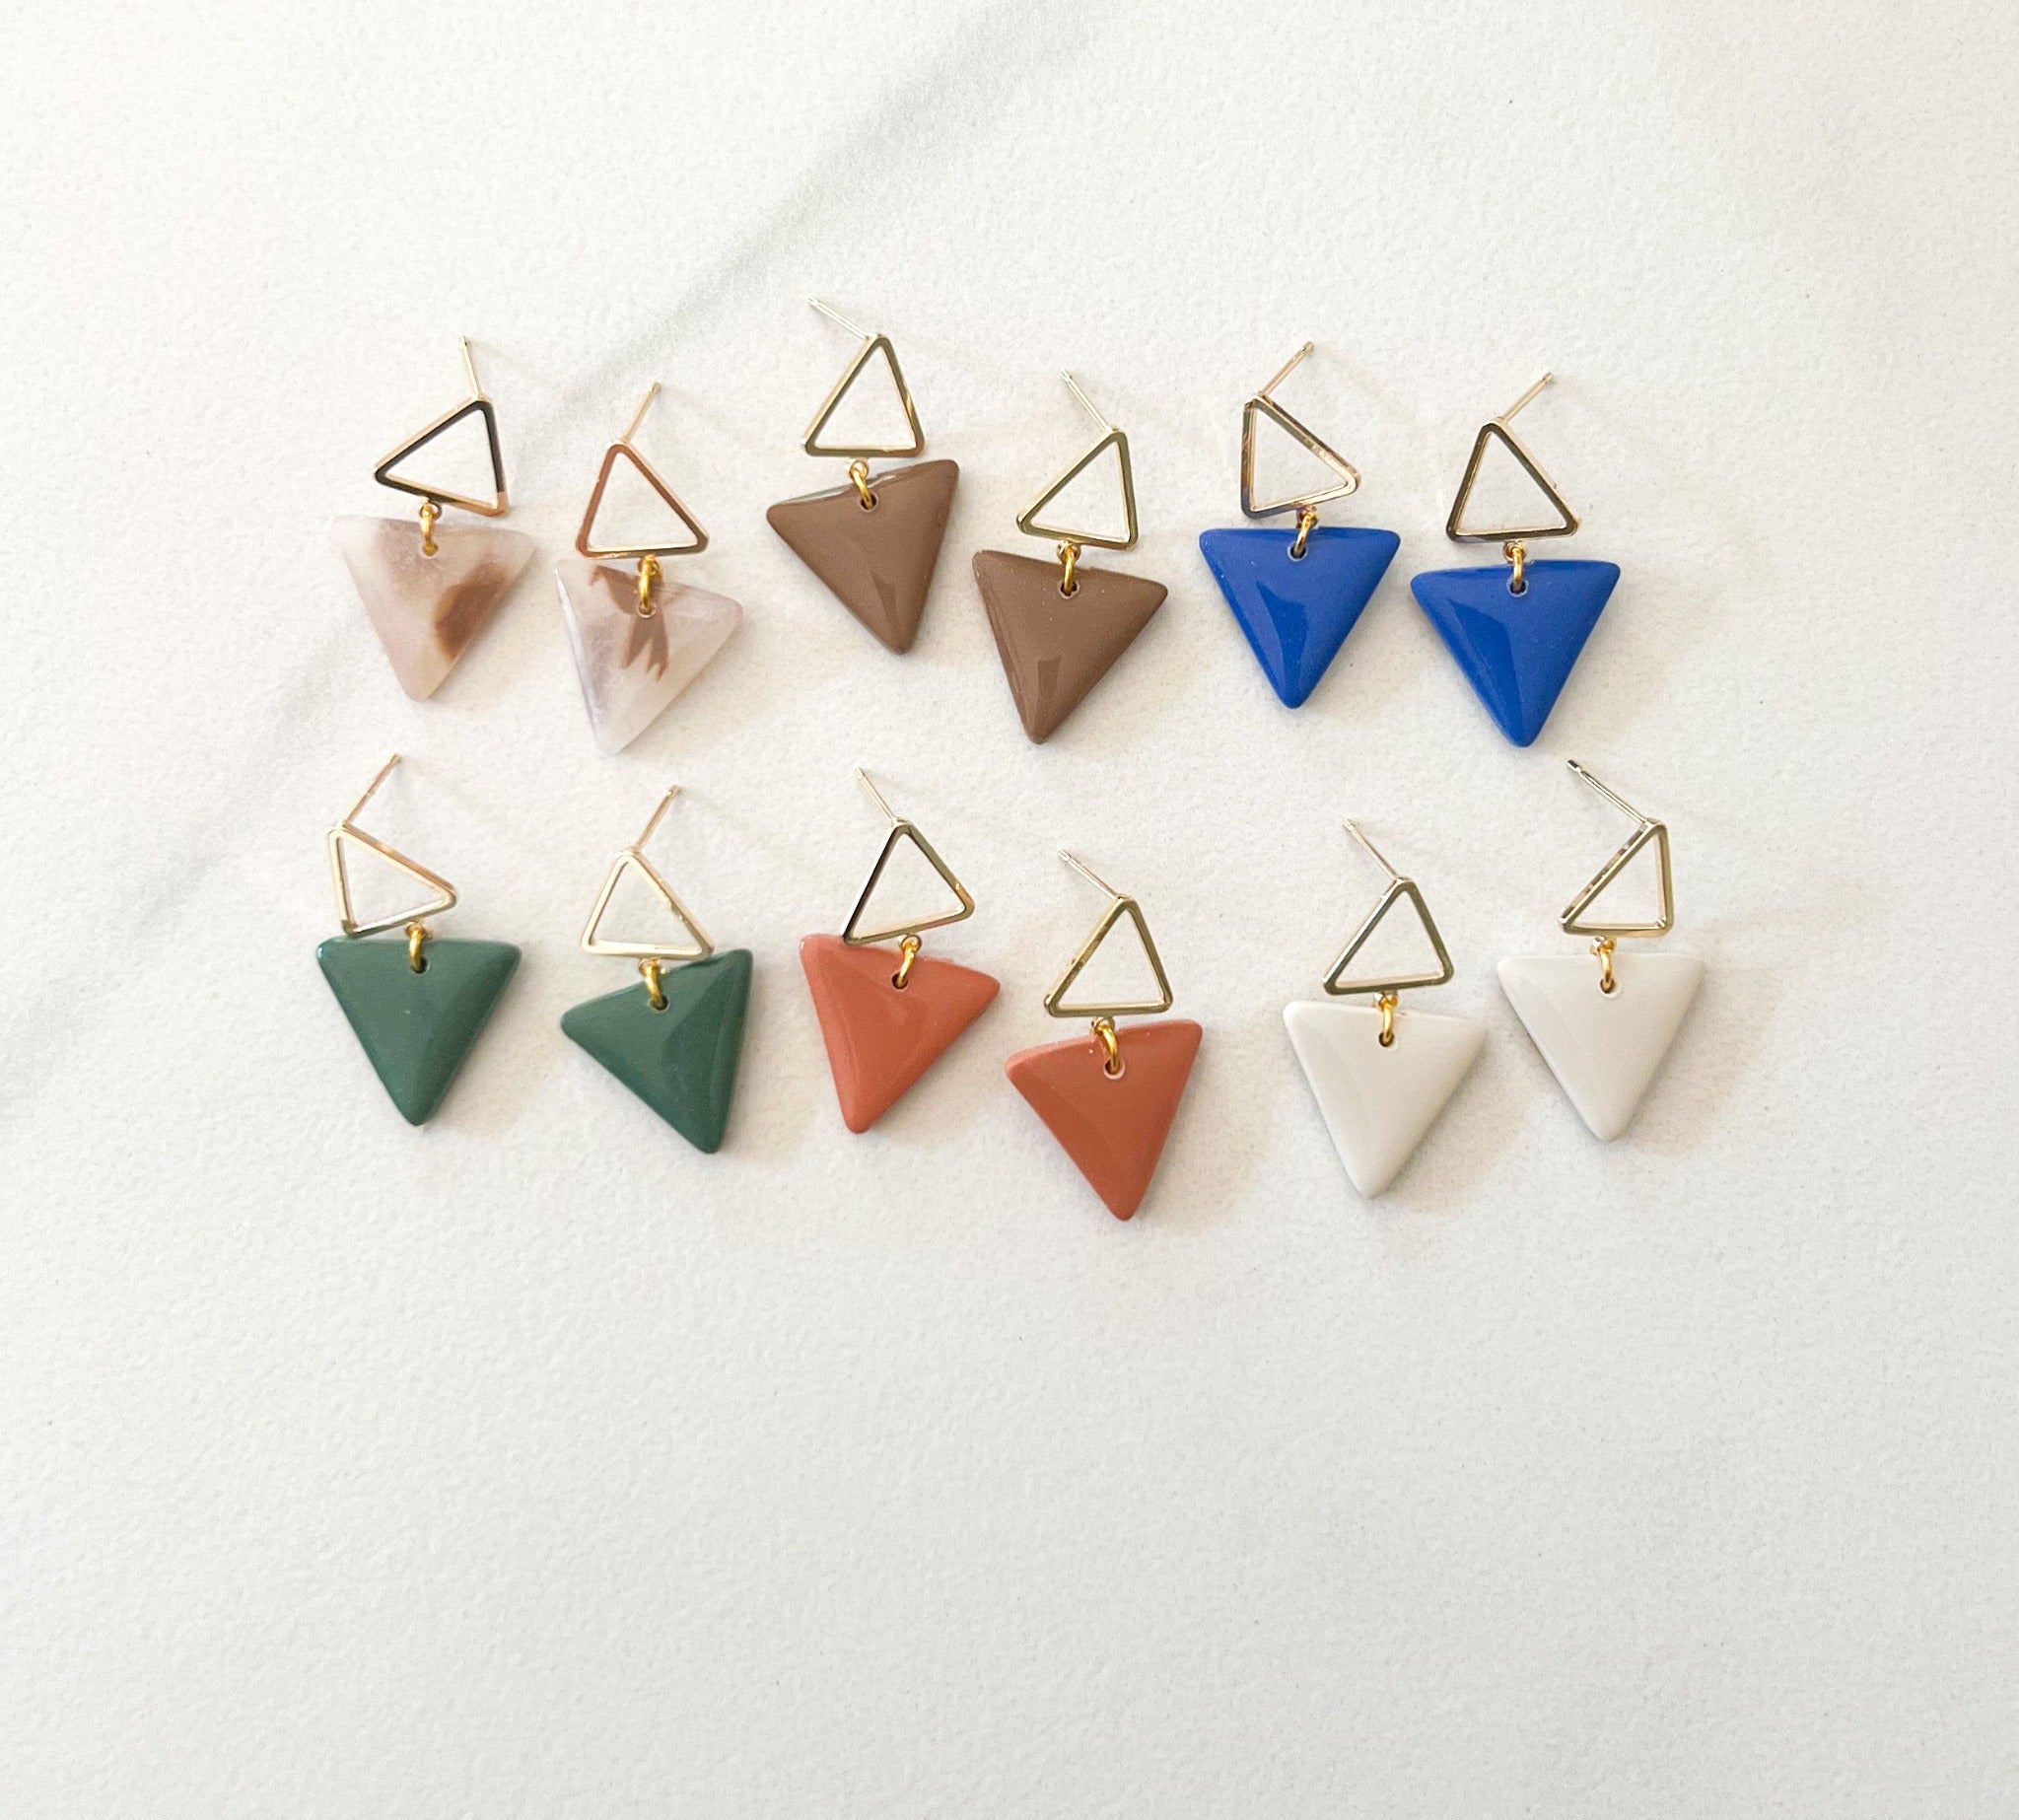 Tangan Jewellery's dainty polymer clay earrings are inspired by geometric  shapes and nature